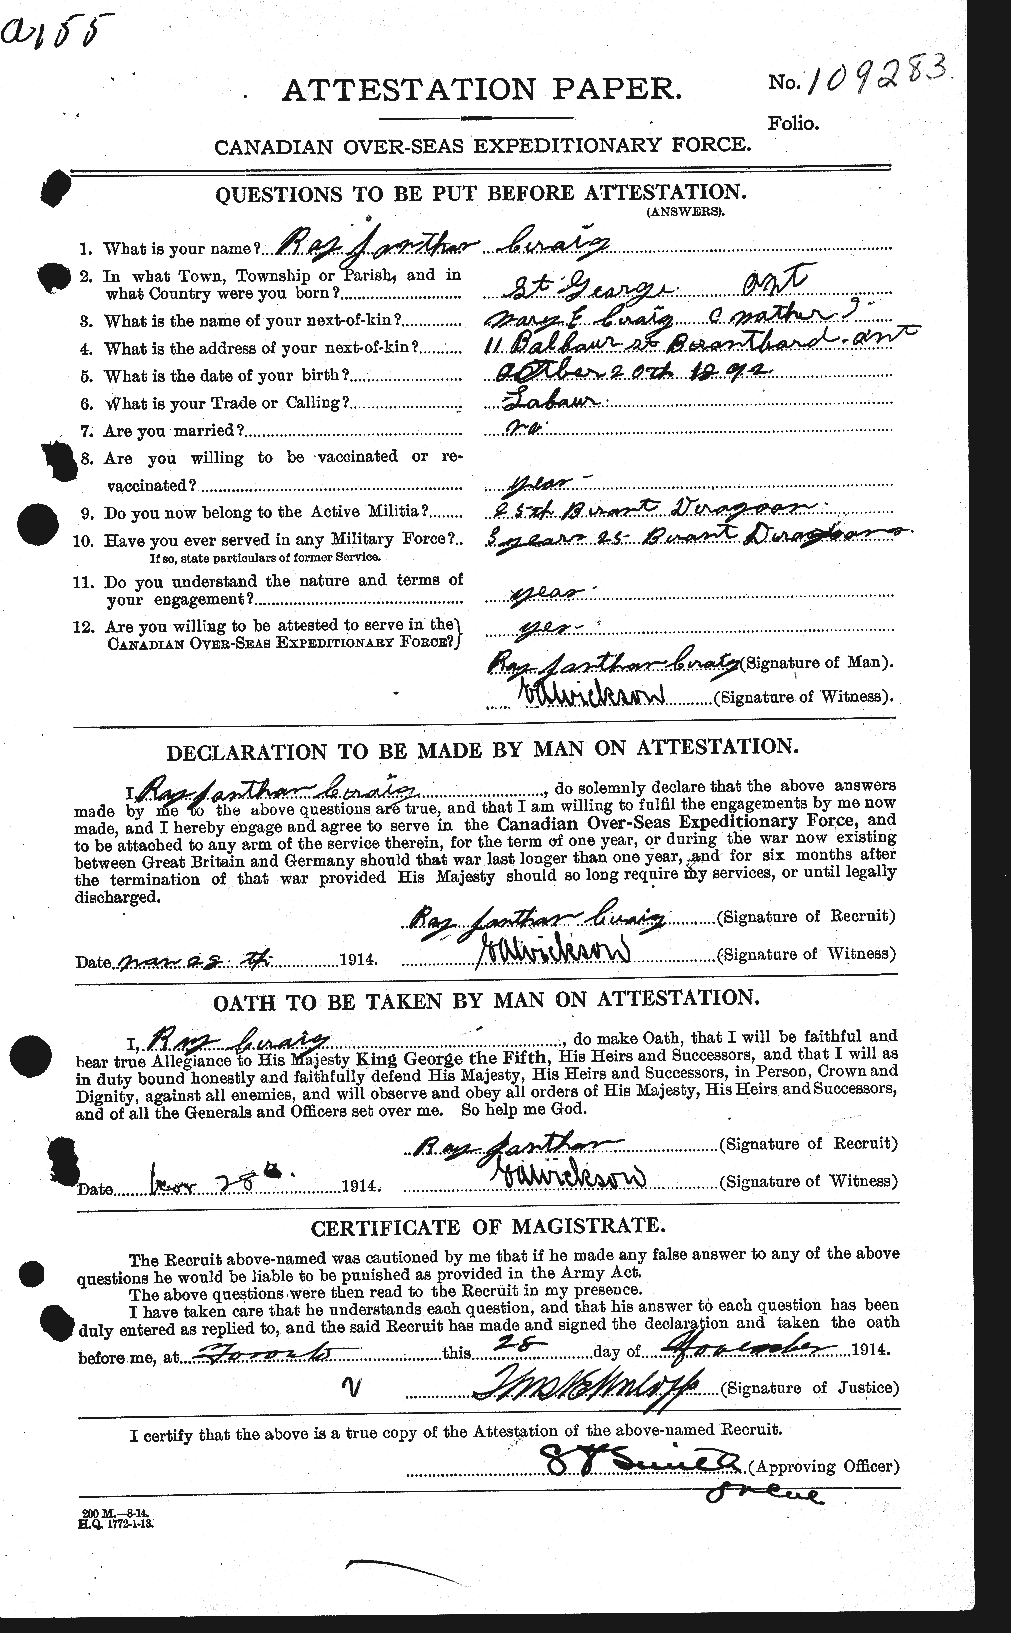 Personnel Records of the First World War - CEF 060773a